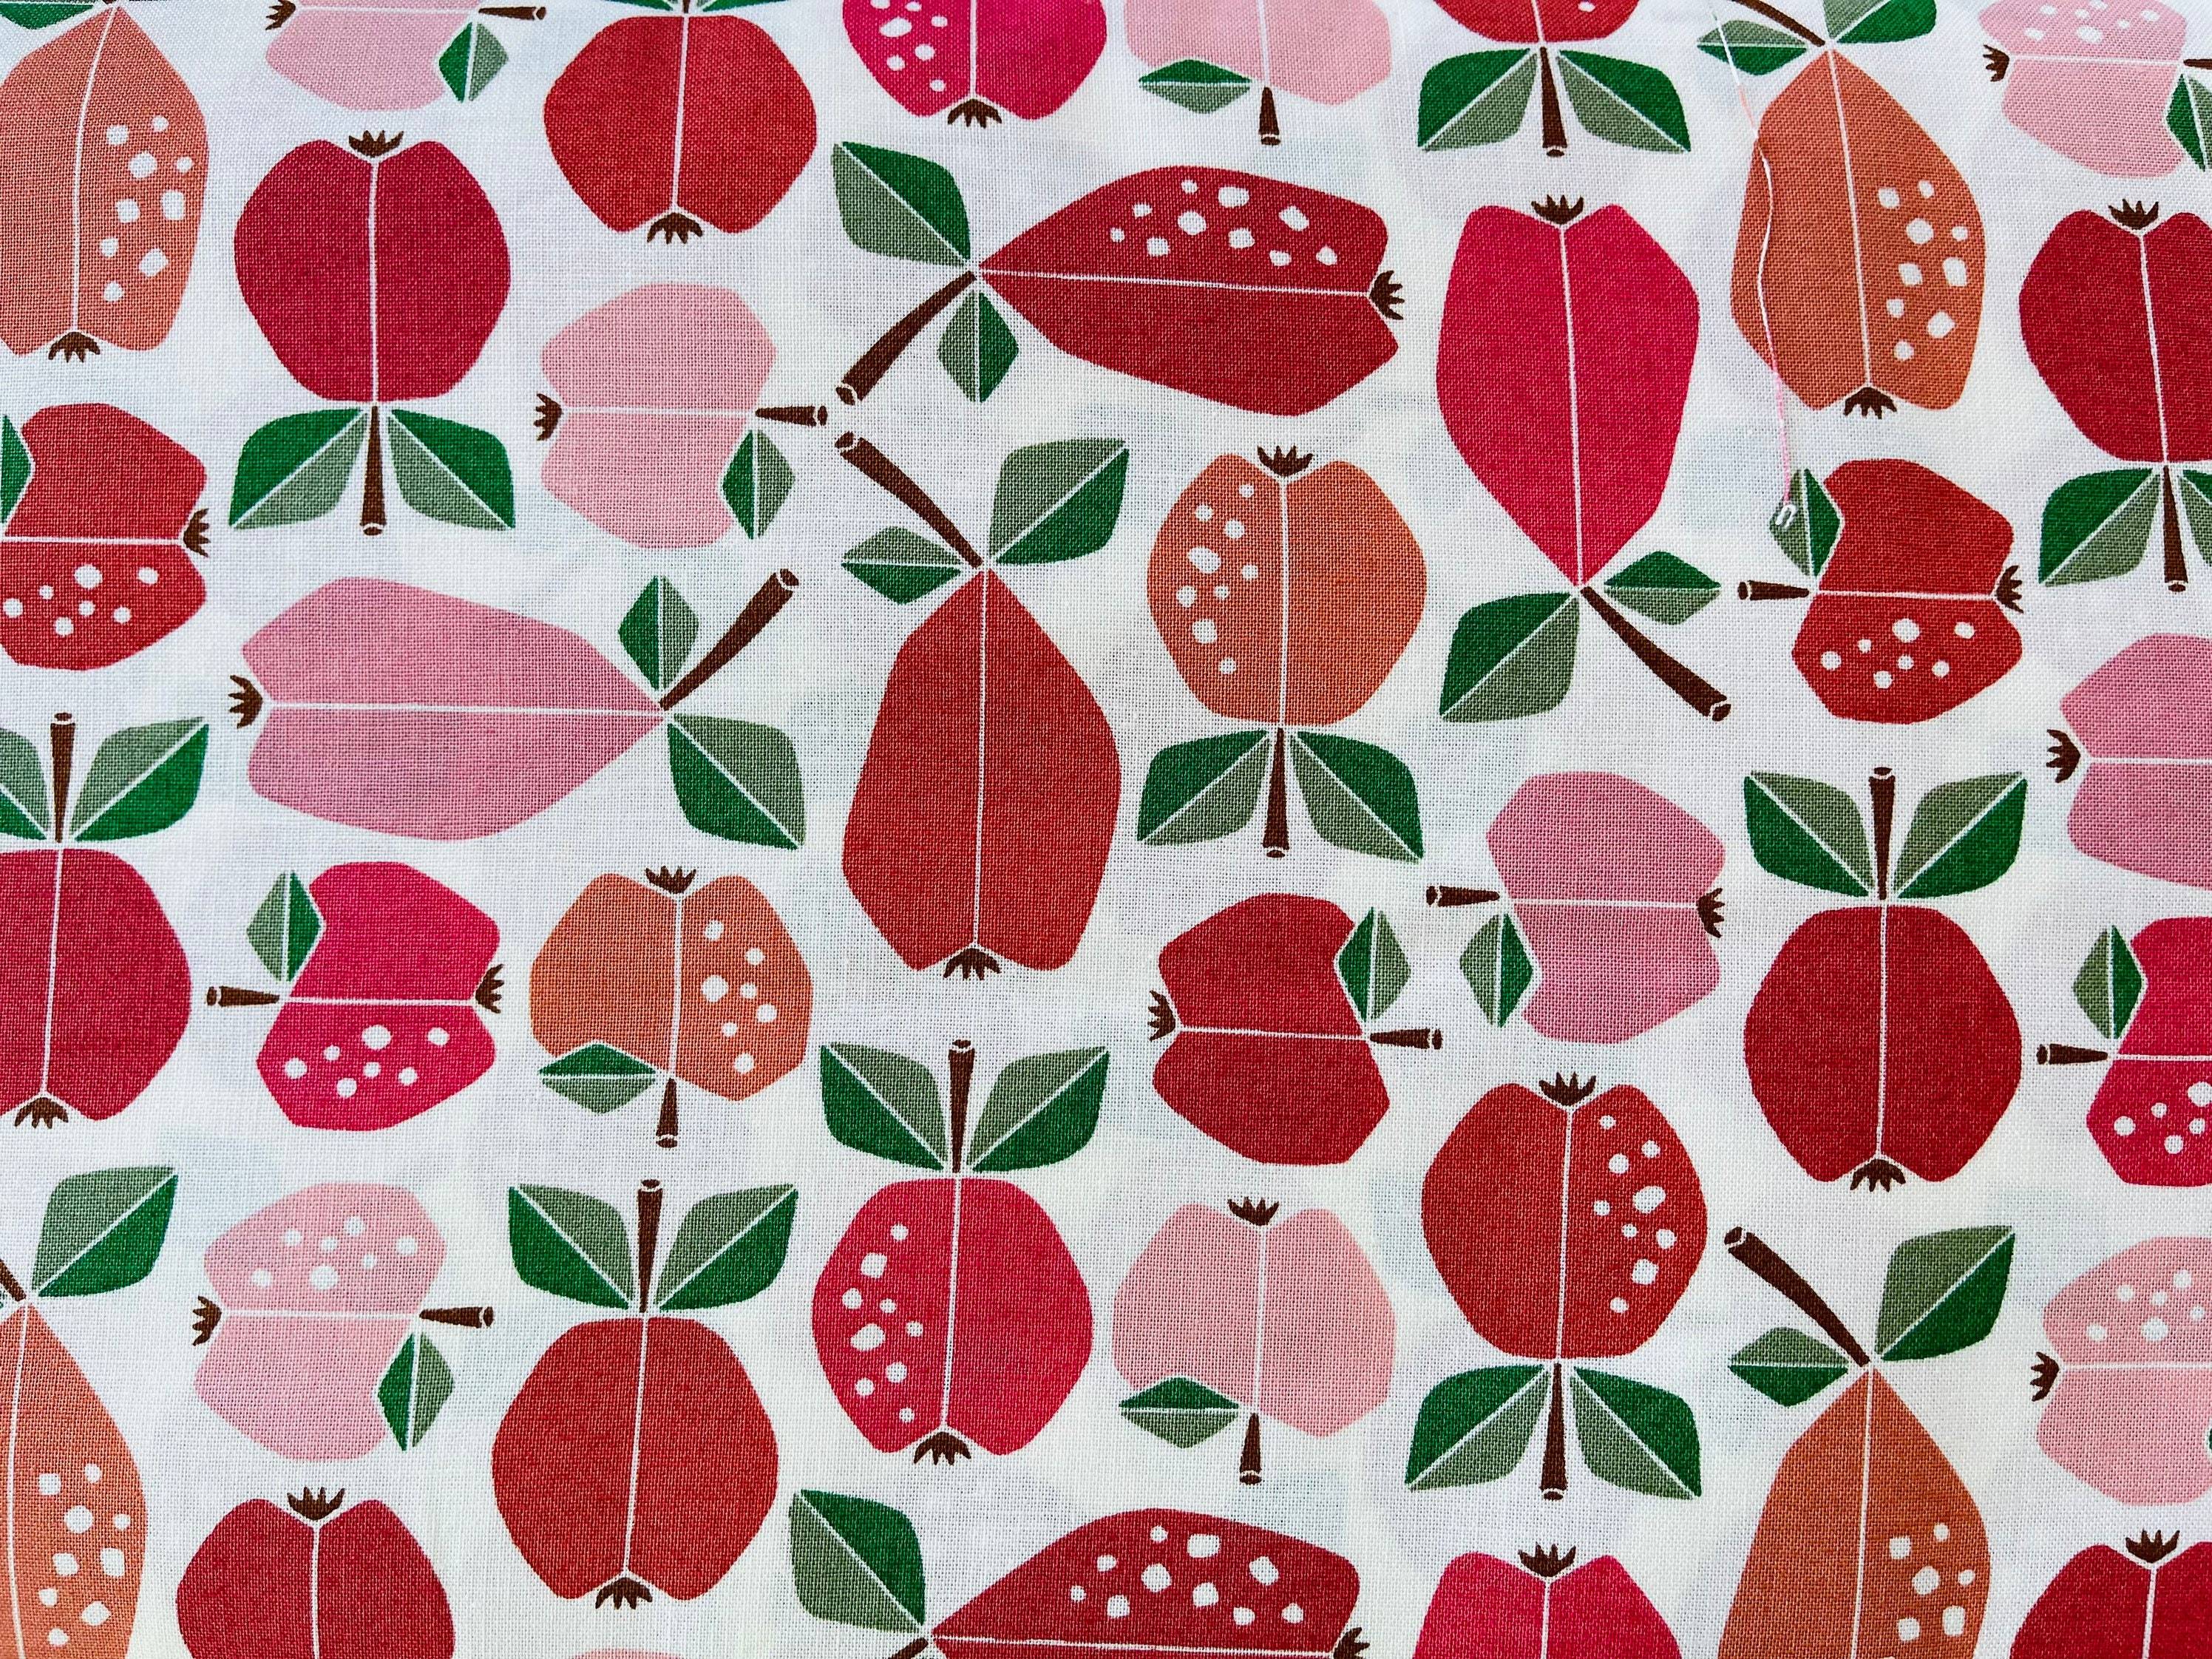 Under the Apple Tree - Orchard - Apple Red Fabric - Loes Van Oosten - Red - Pink - Green - Cotton + Steel  - Quilting Cotton - LV503-AR1